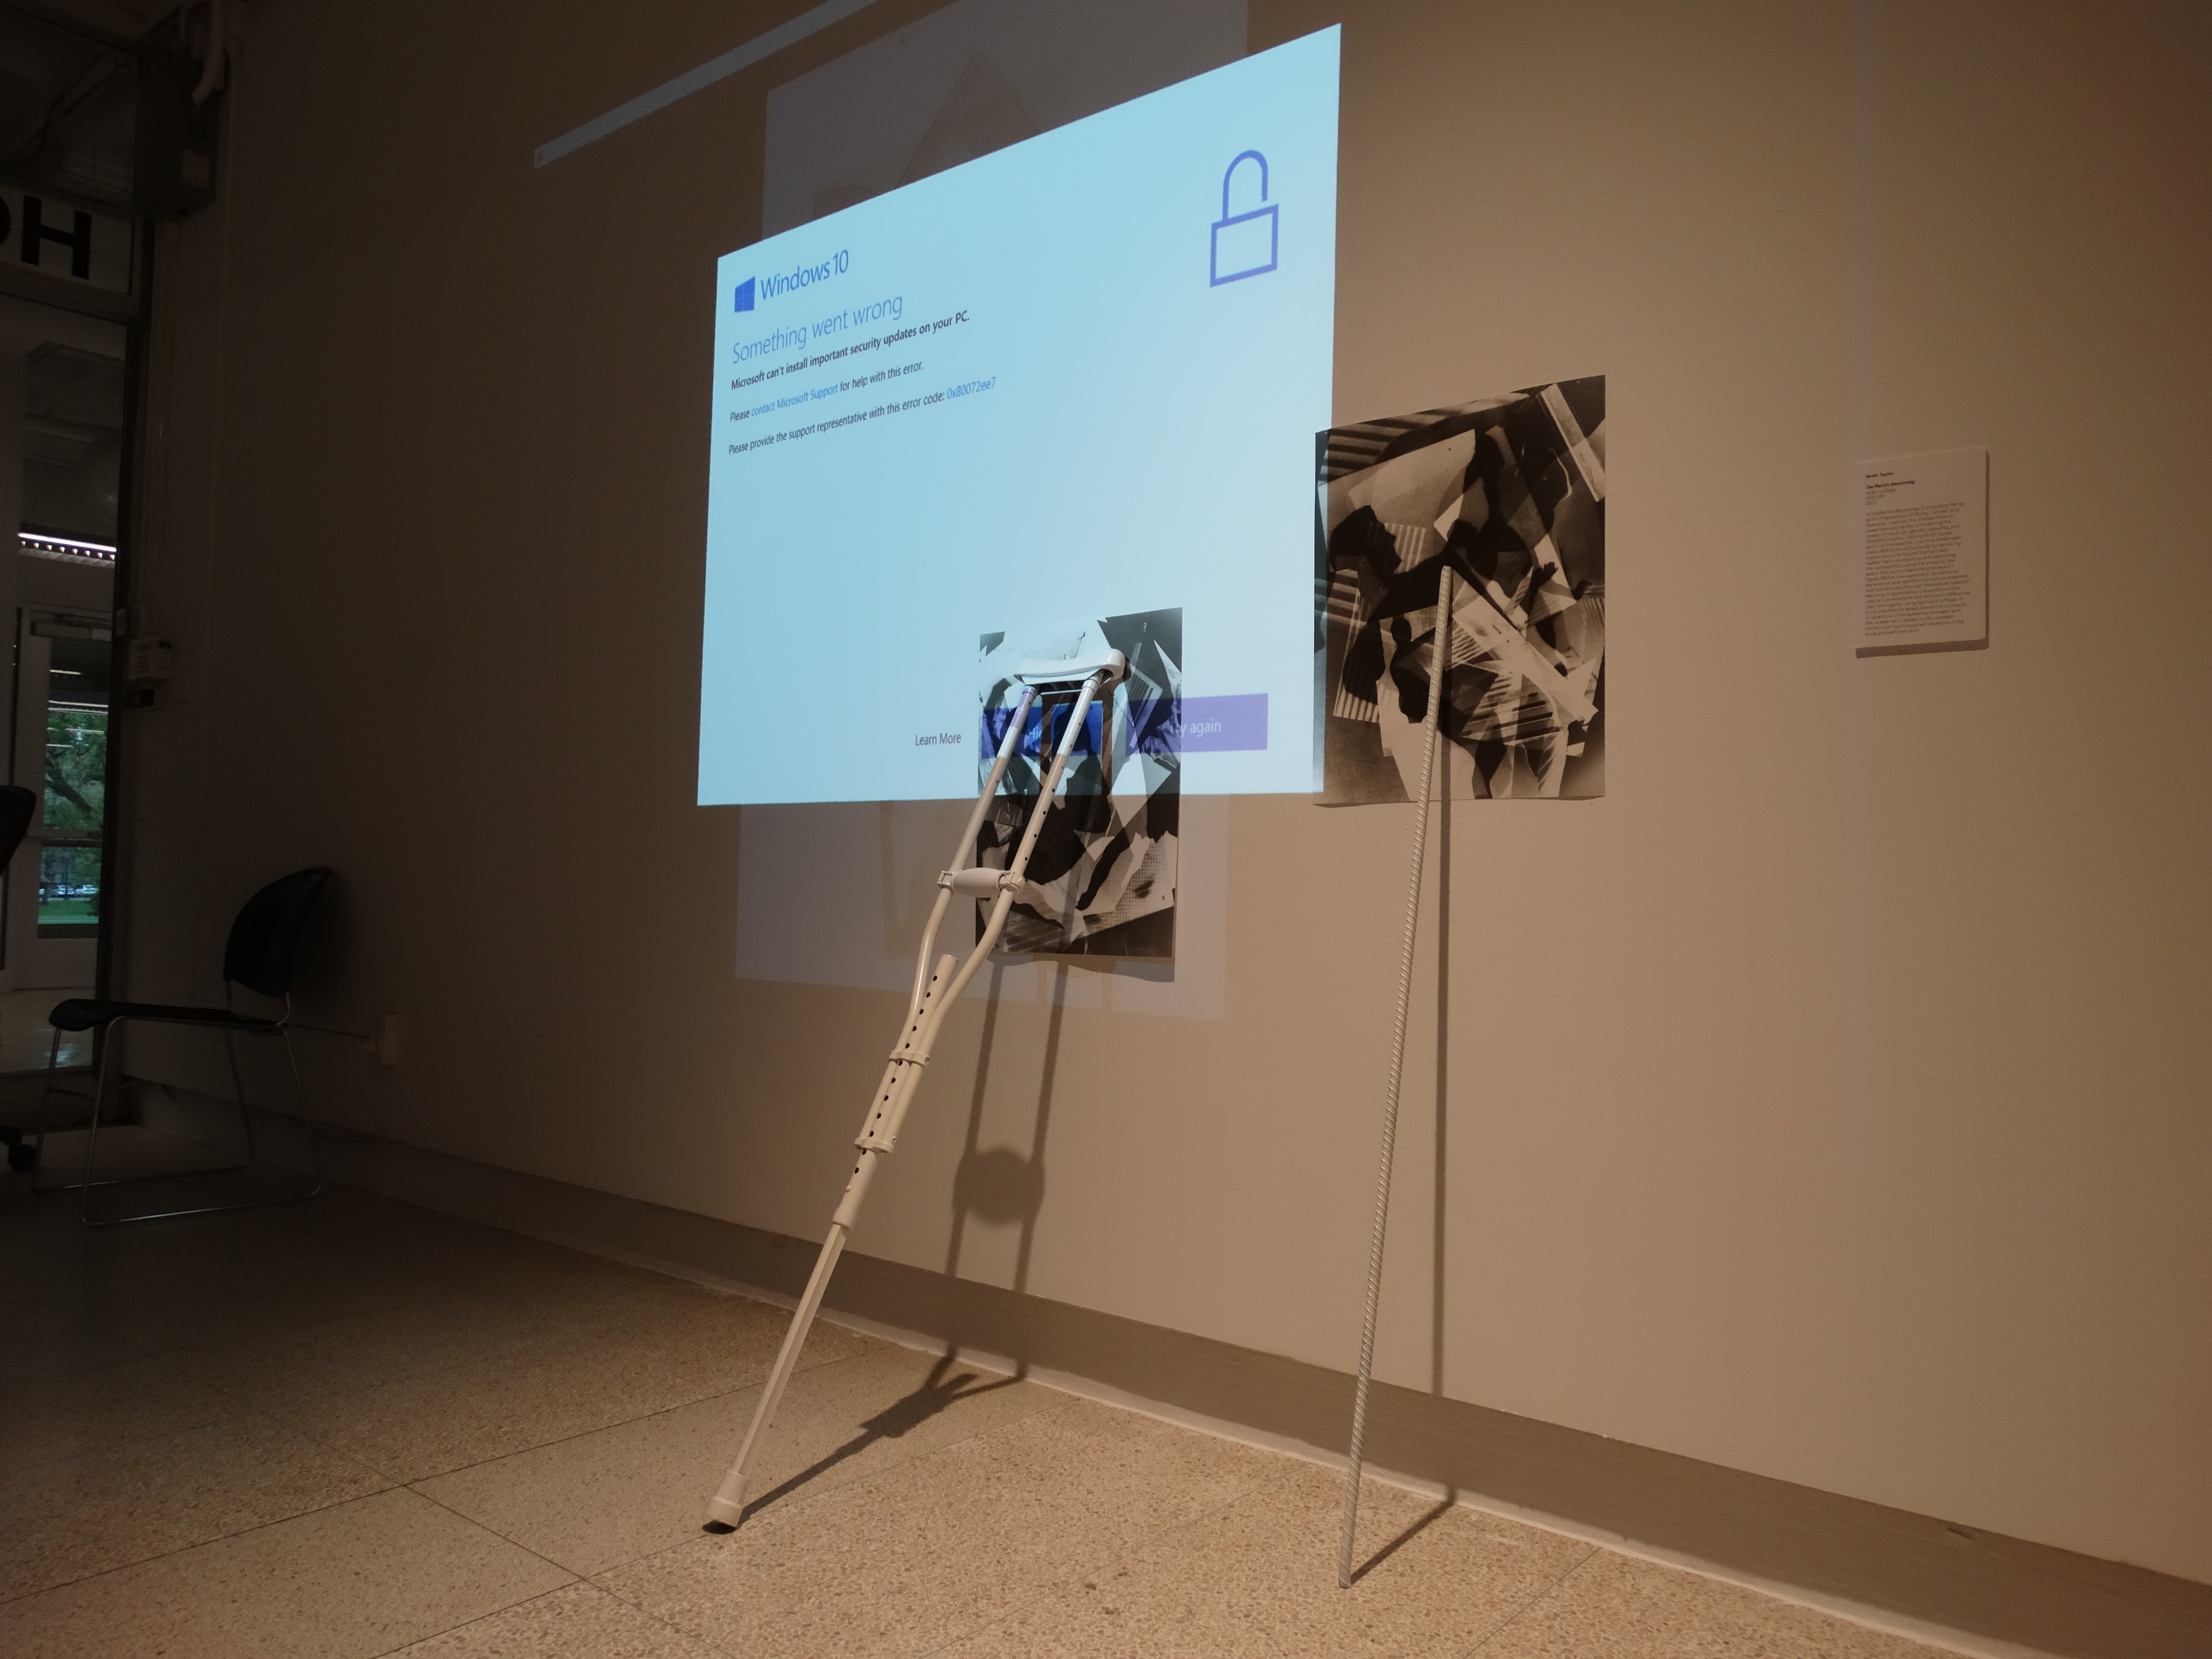 Projection on wall with crutch leaning against it